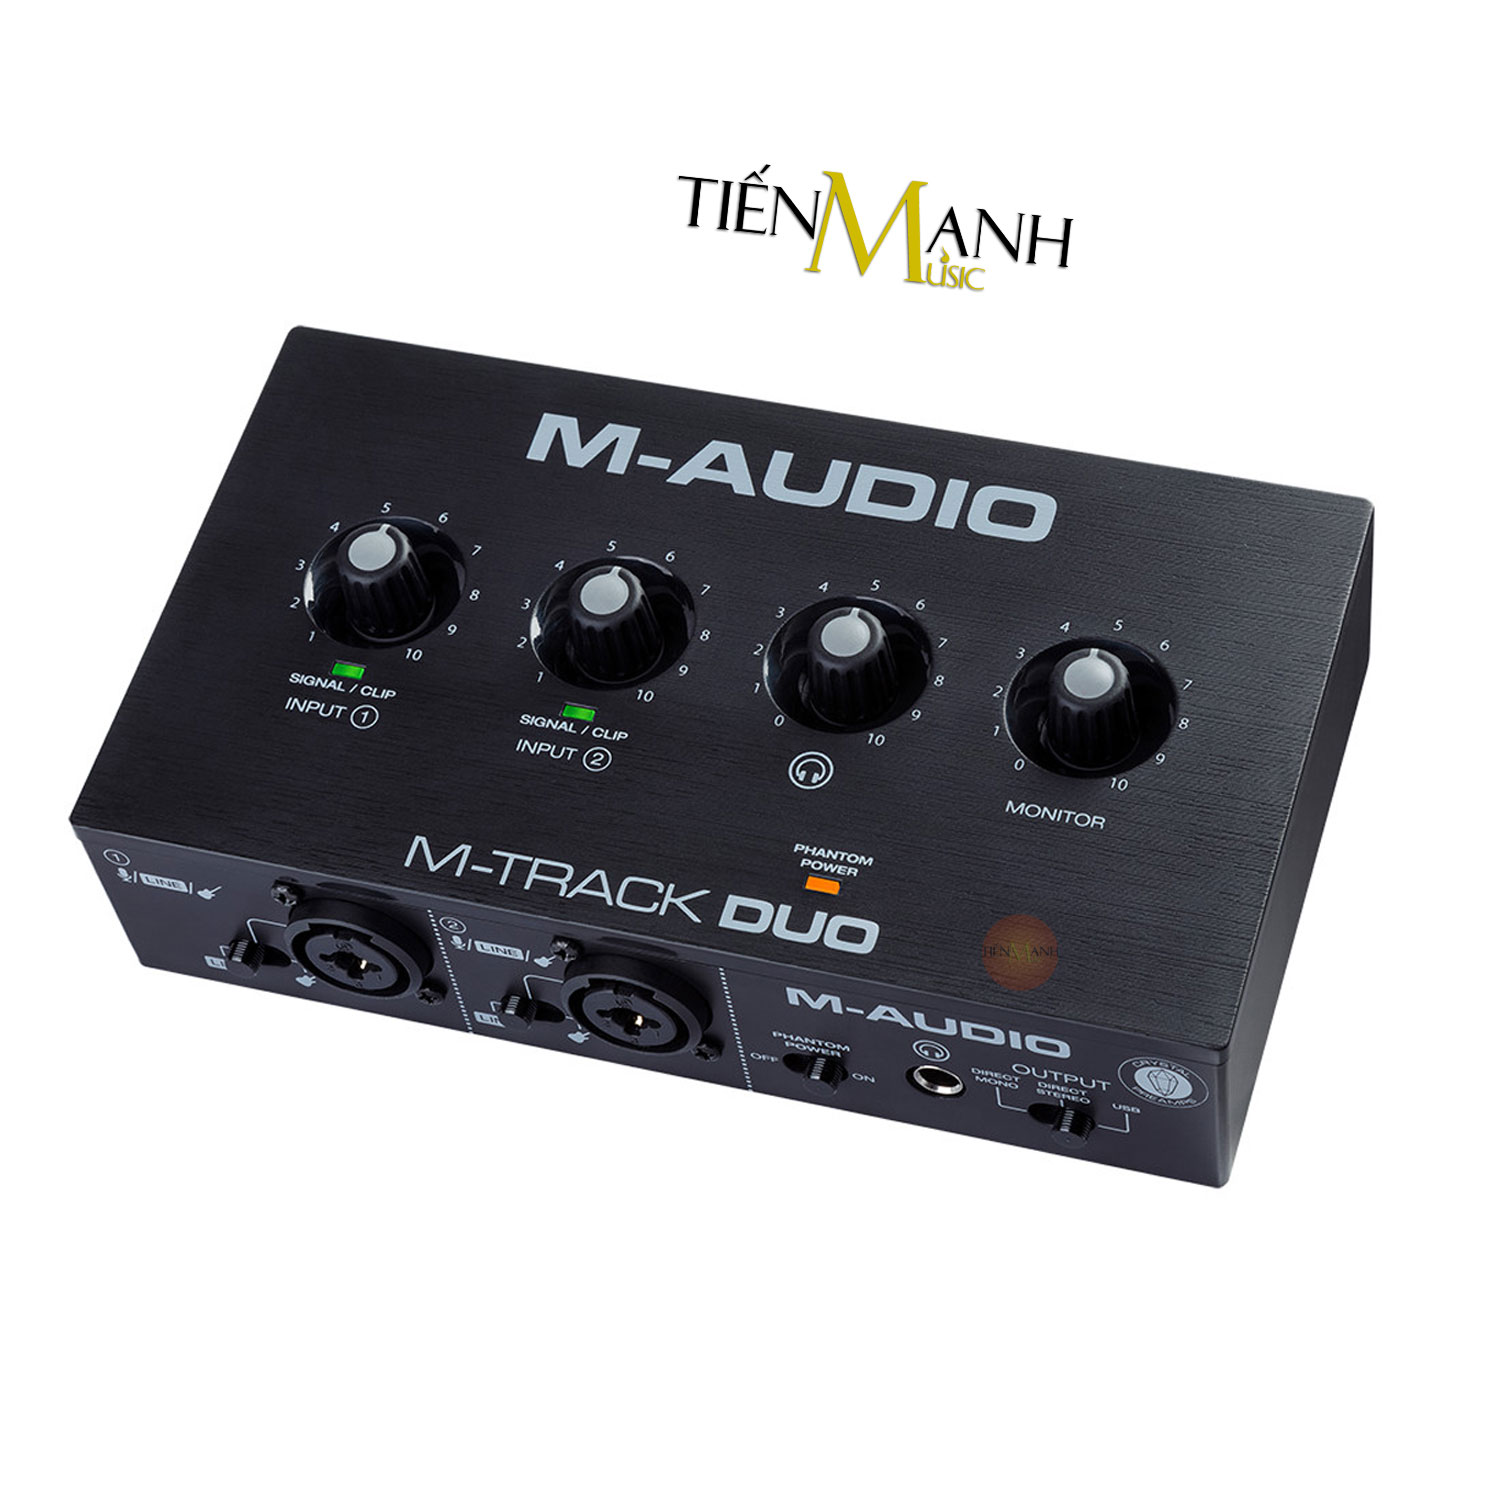 Cach-su-dung-Soundcard-M-Audio-Mtrack-Duo.jpg